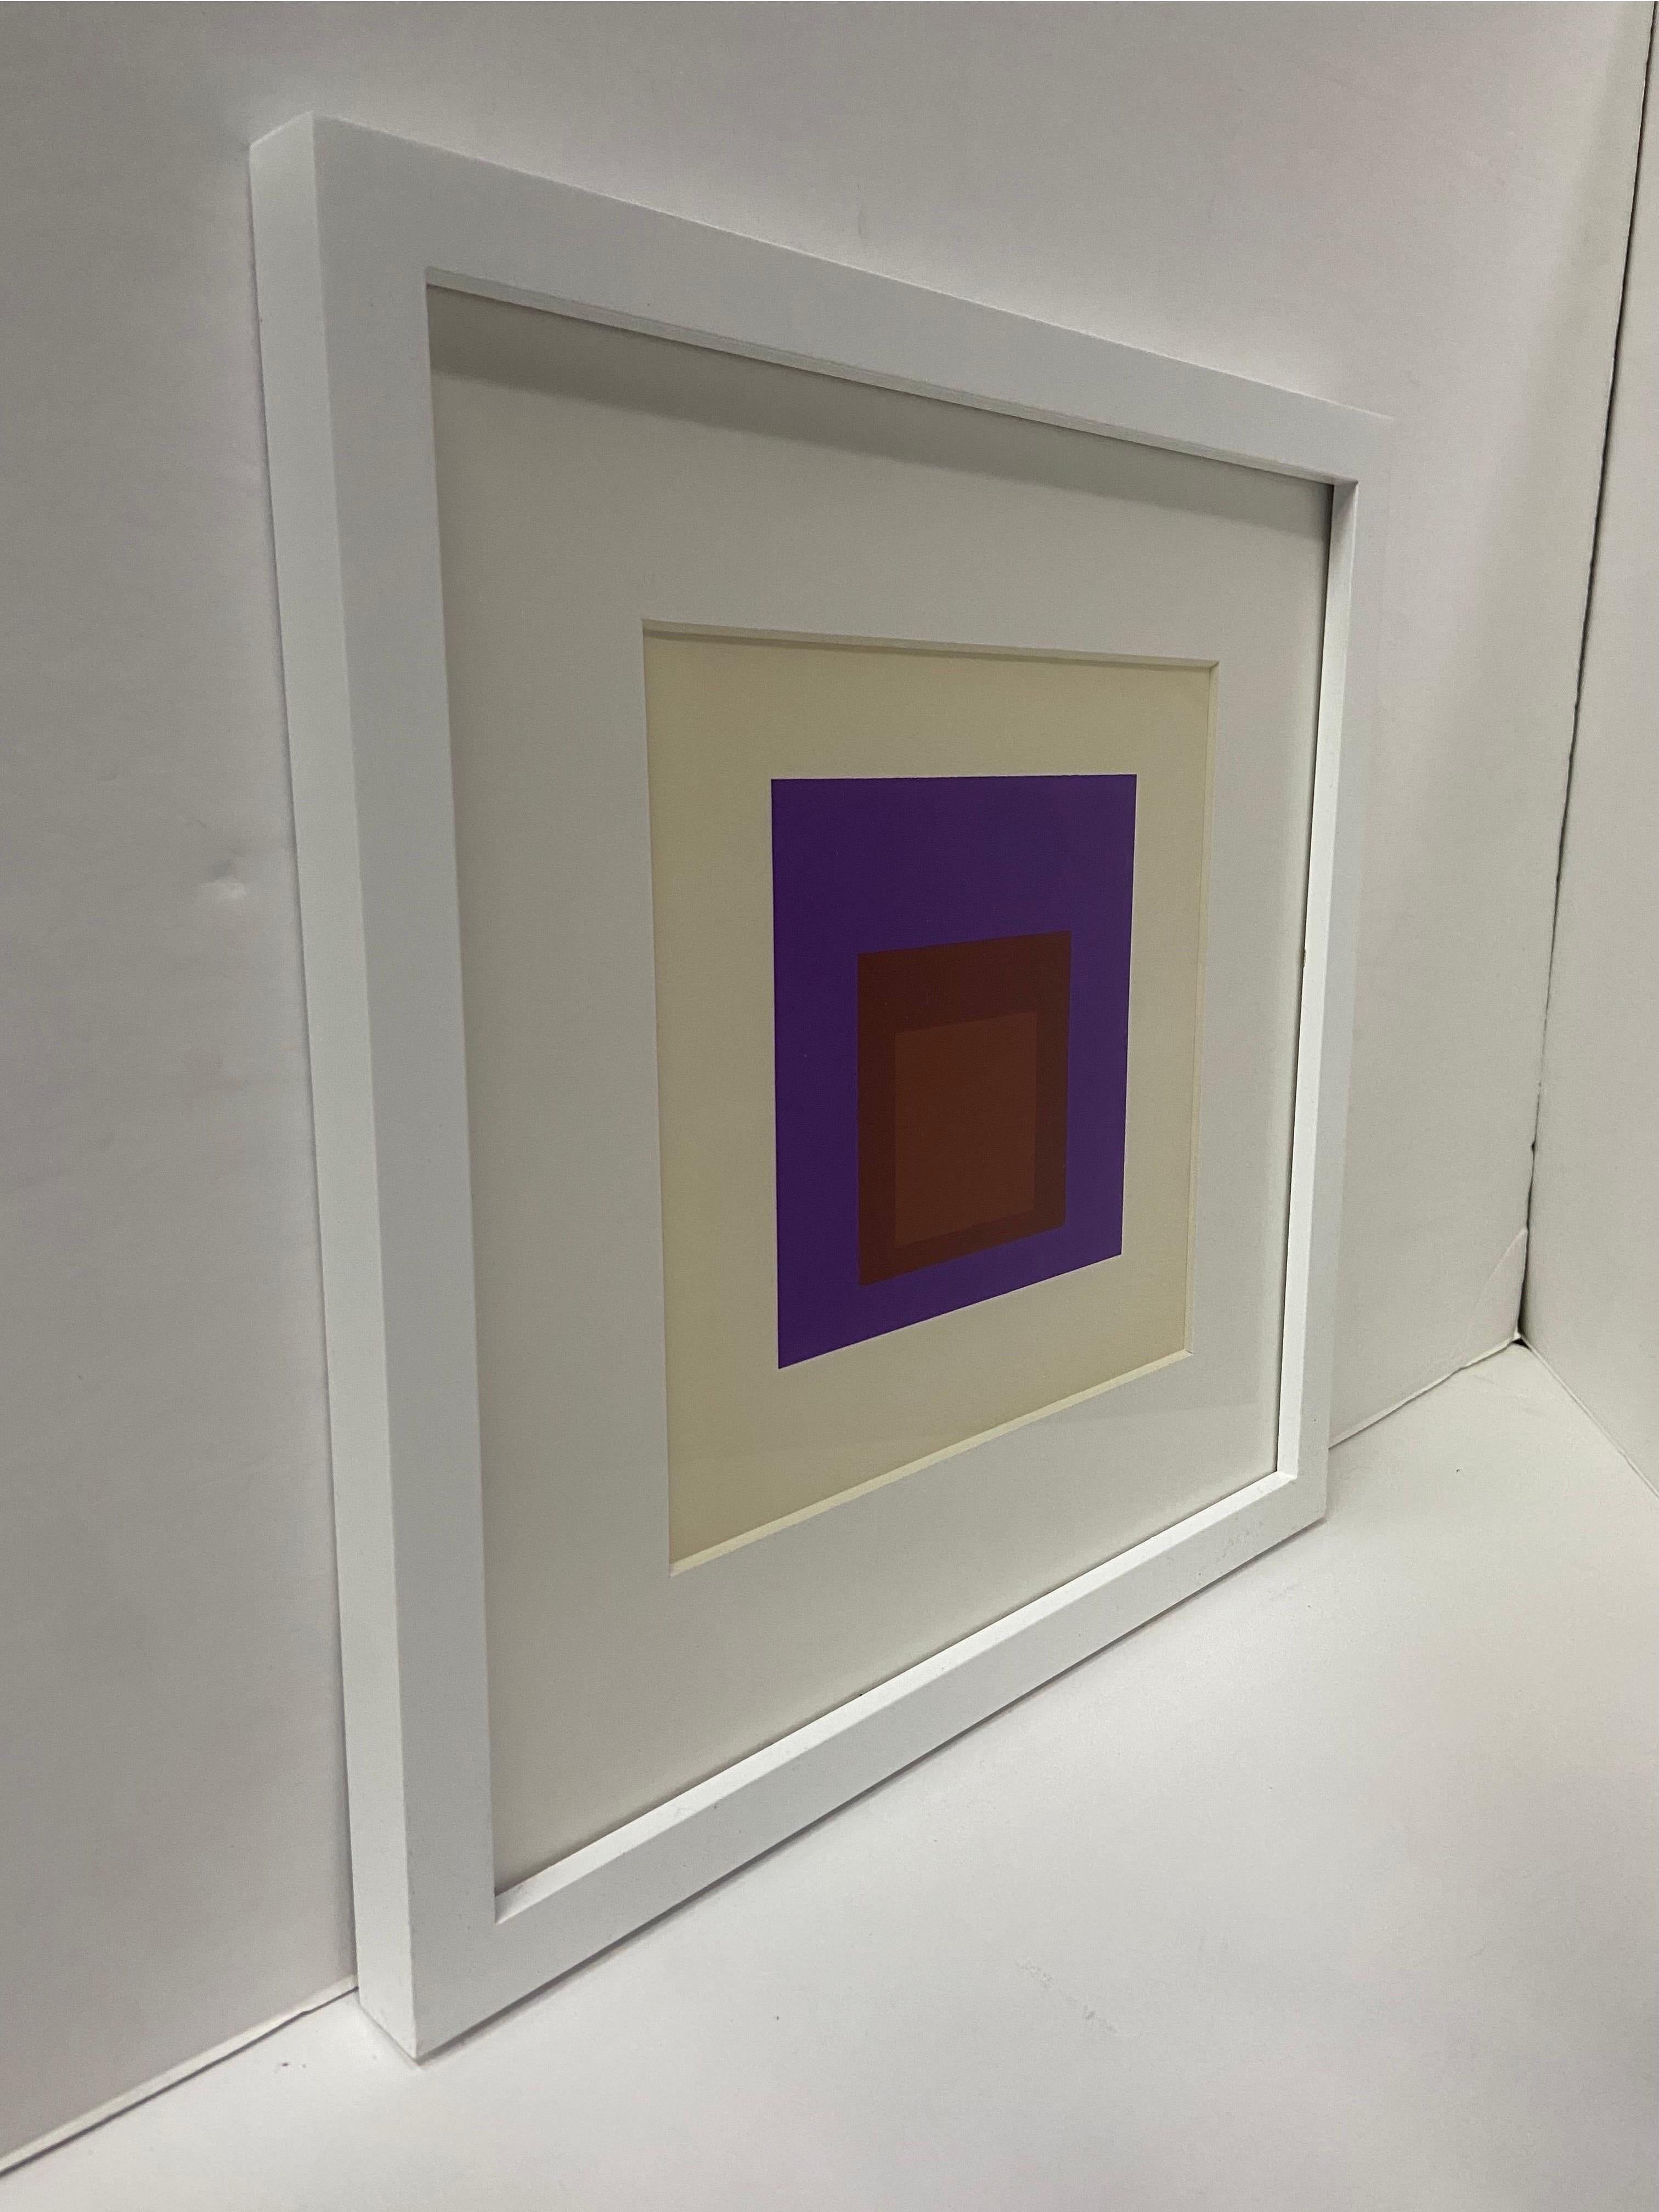 A vintage circa 1965 silkscreen serigraph print from the Homage to the Square Soft Edge Hard Edge by Joseph Albers. This print was part of promotional material sent to prospective clients to purchase the book. This print measures approximately 8” by